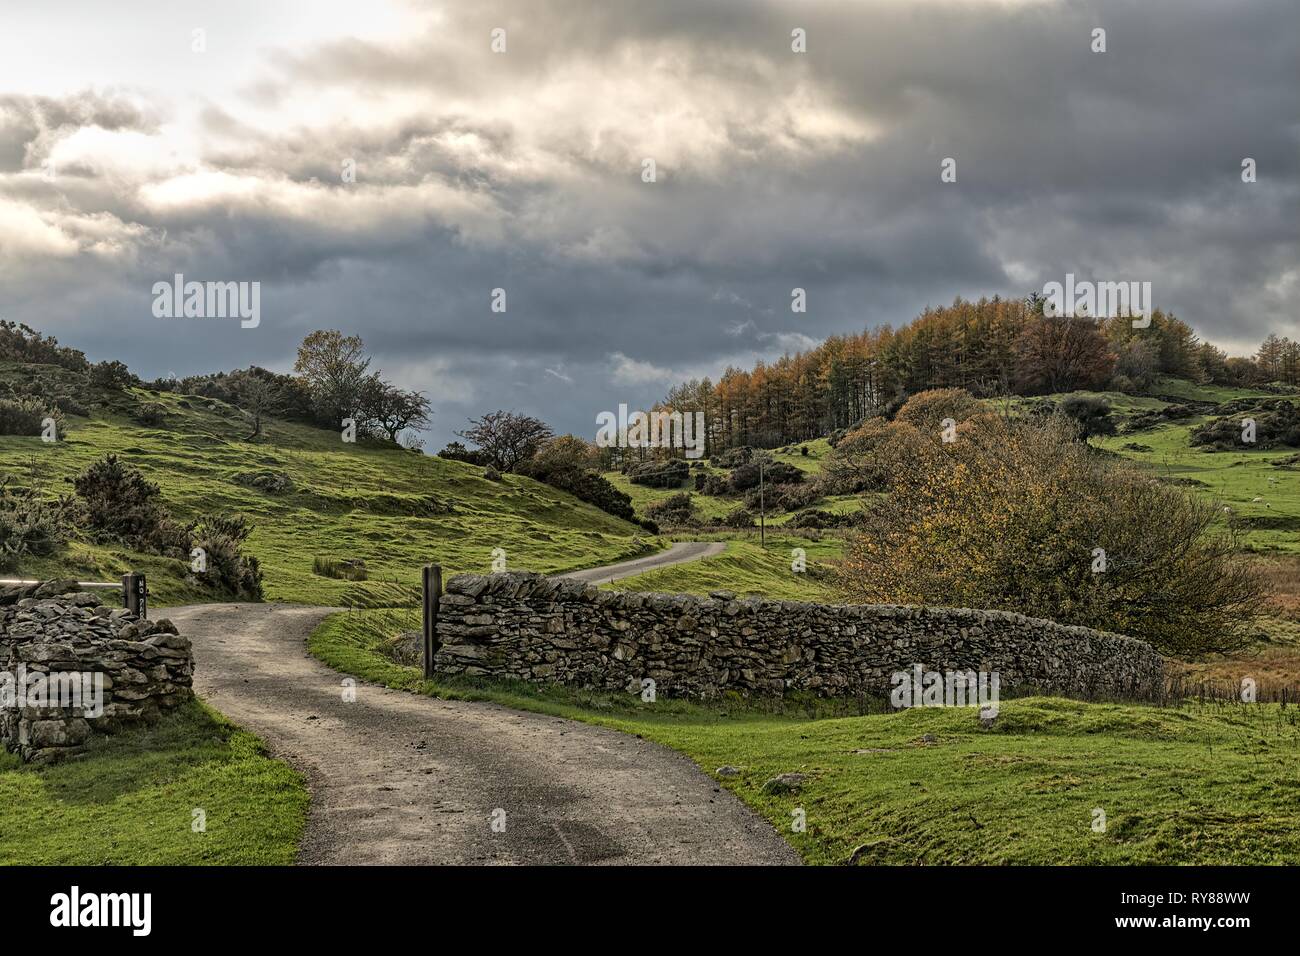 A winding country road passing through Rural autumn meadow and trees. Stock Photo